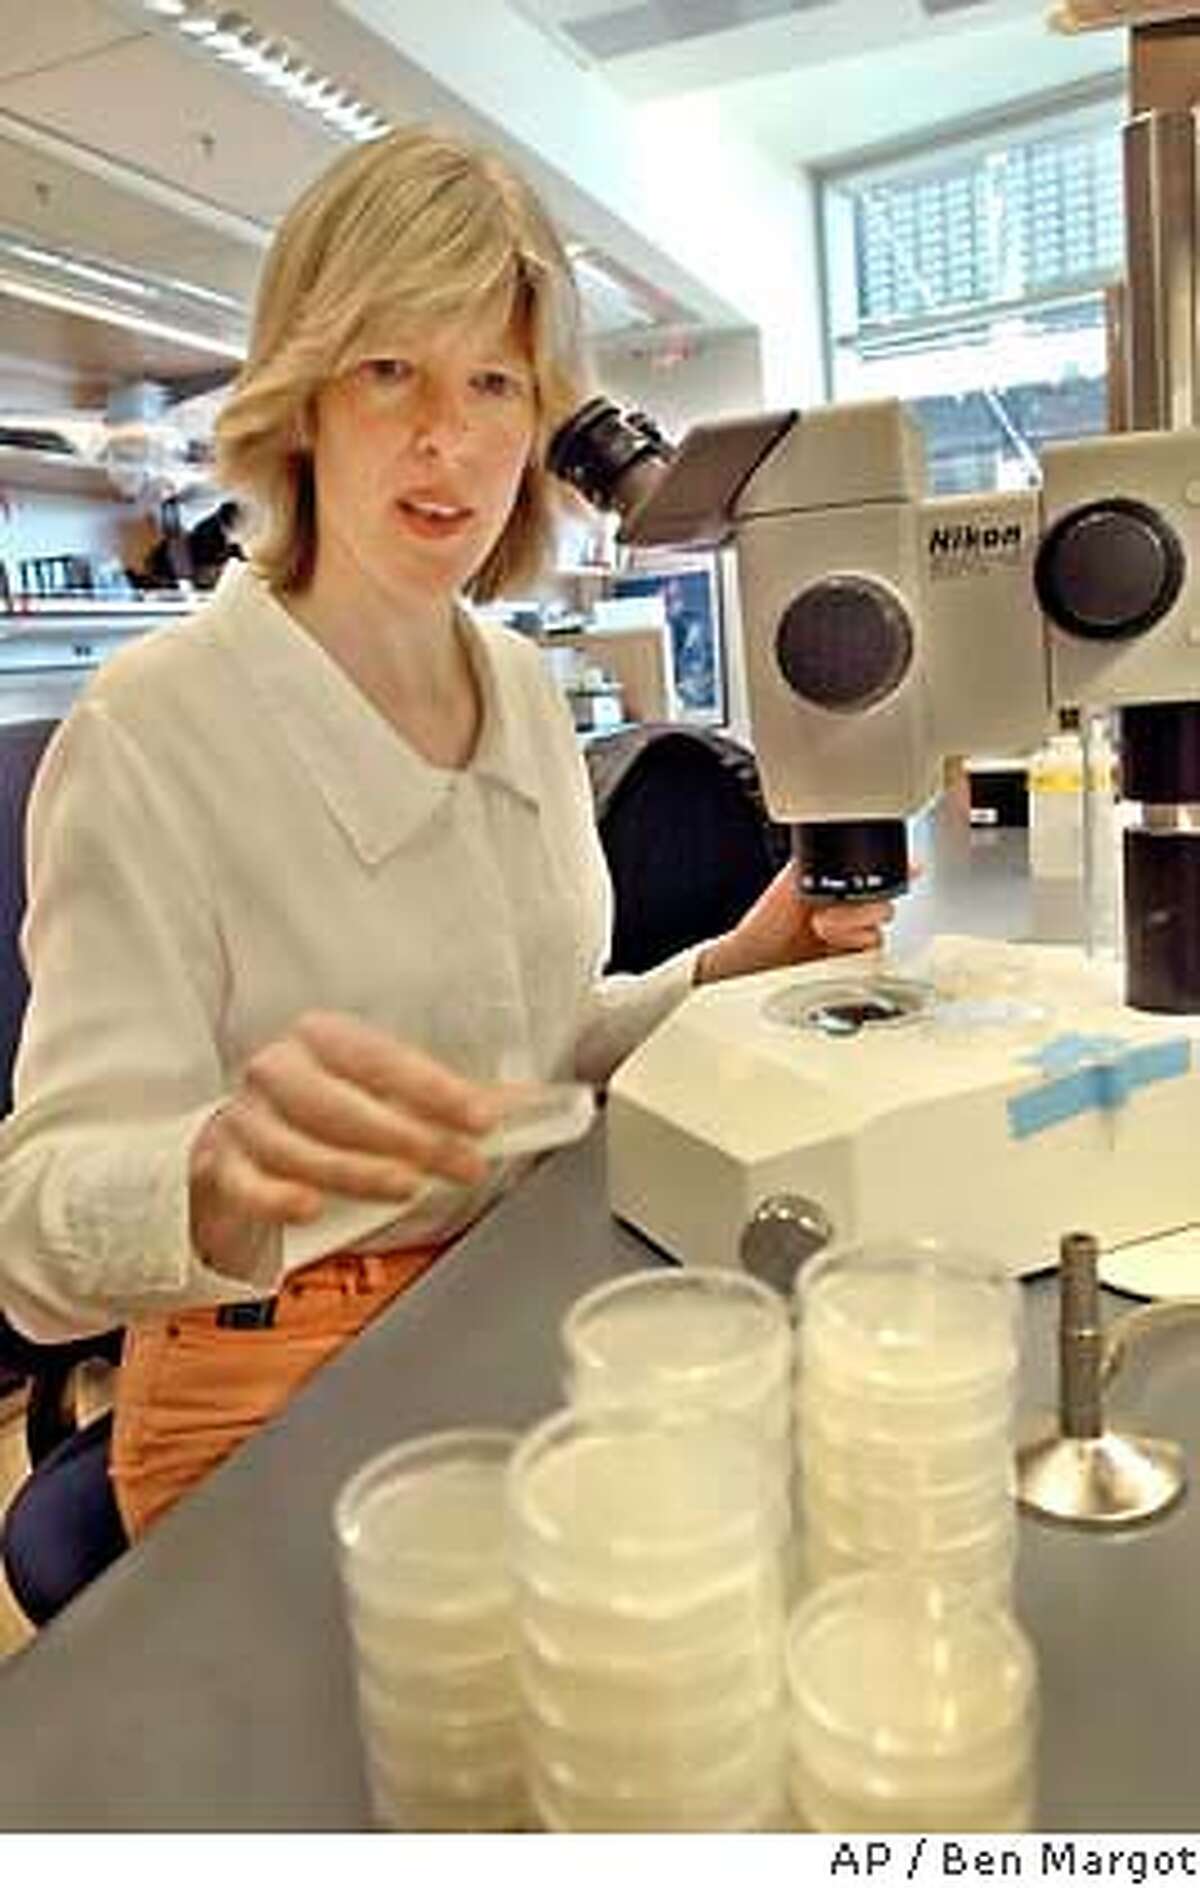 ** ADVANCE FOR SUNDAY, AUG. 3 **Molecular geneticist Dr. Cynthia Kenyon prepares to view a sample July 24, 2003, in a laboratory at the University of California-San Francisco. Kenyon says her research indicates that a life-prolonging drug could conceivably arise in five years, under the best circumstances. (Photo/Ben Margot)